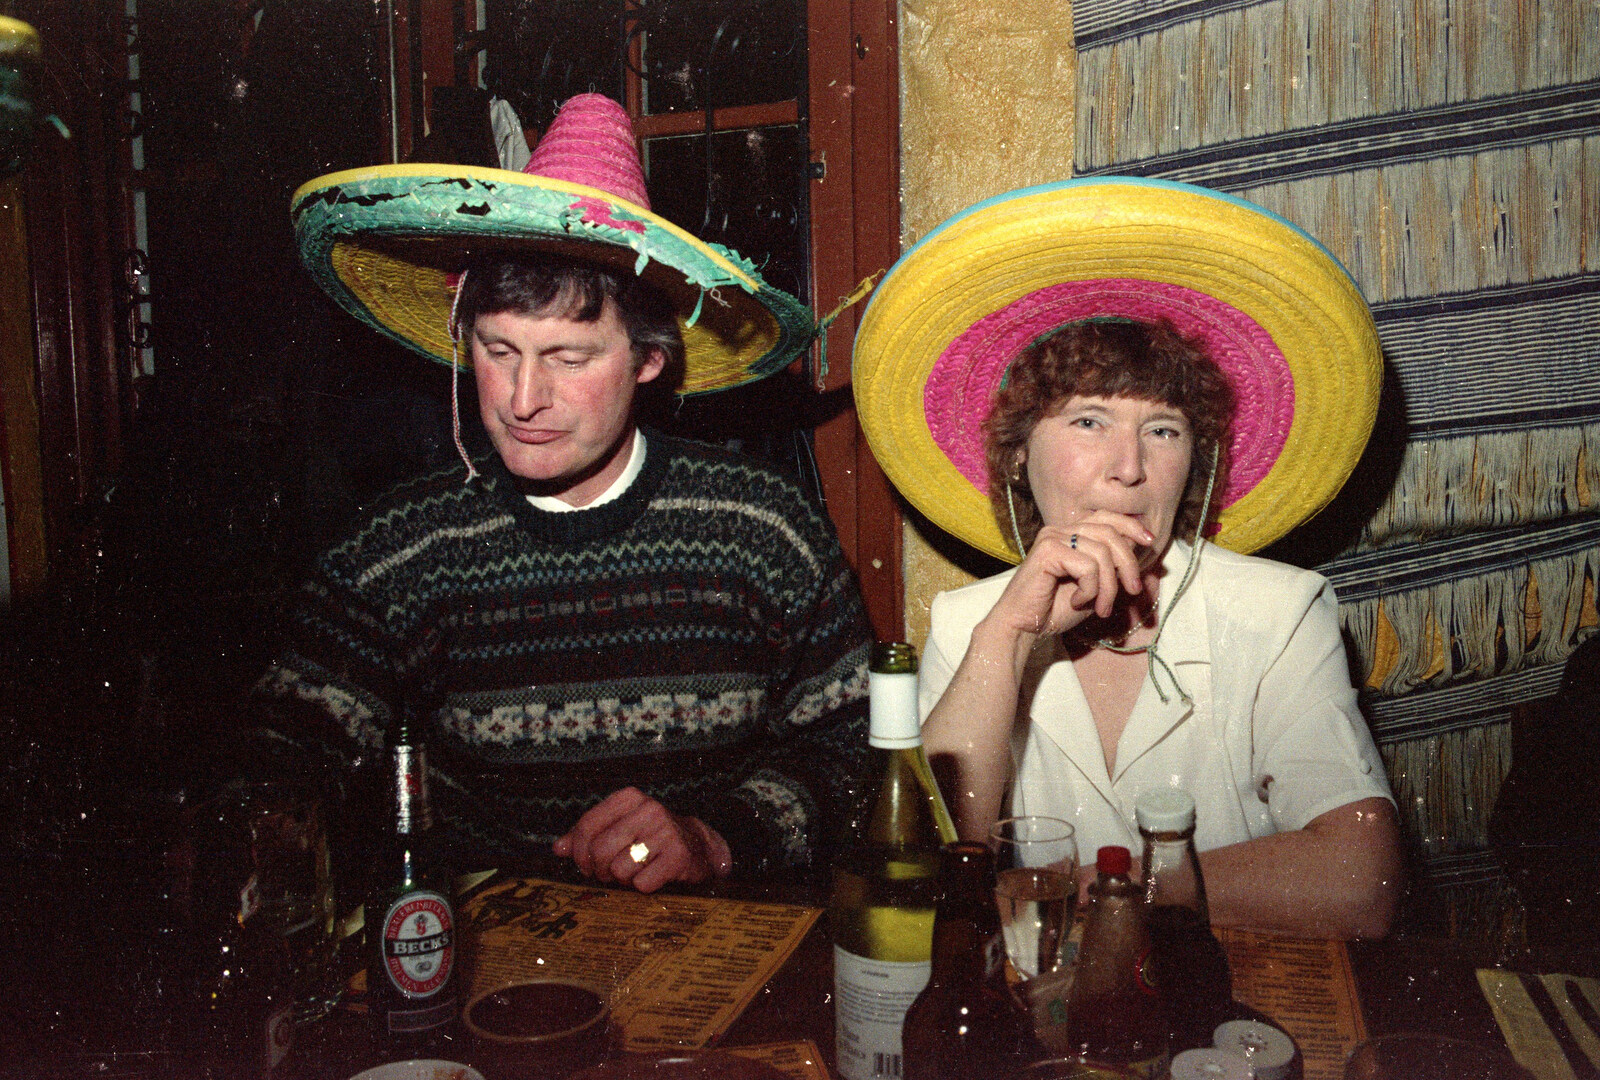 Geoff and Brenda from Pedros and Daffodils, Norwich and Billingford, Norfolk - 20th April 1991